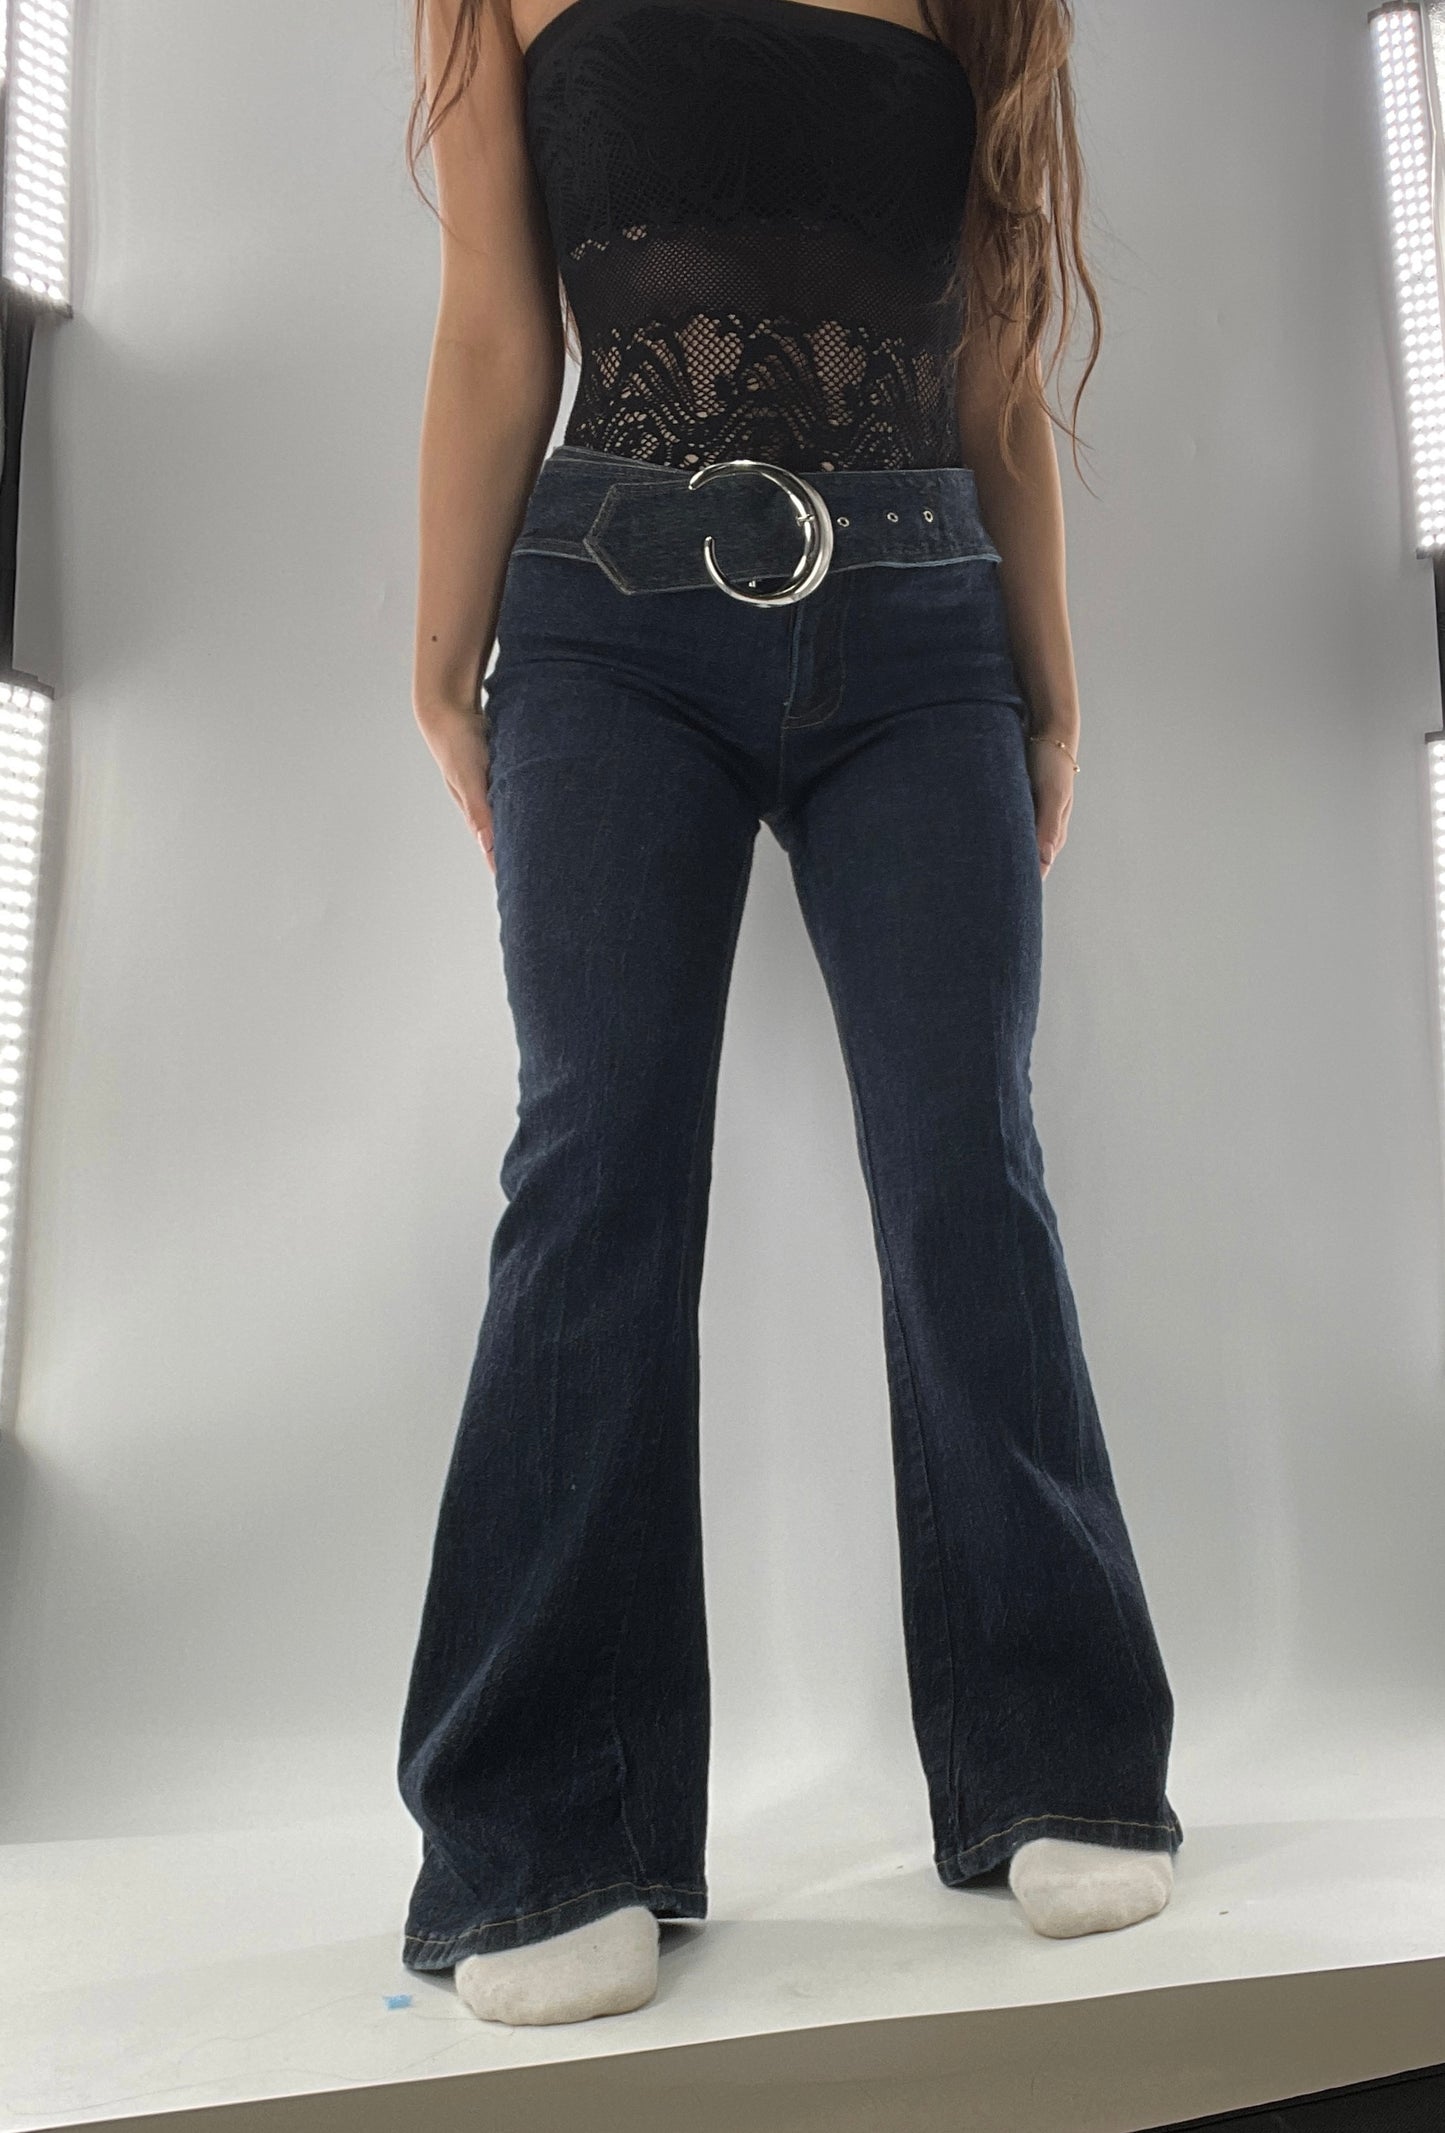 Vintage 90s Picasso Style Jean Dark Wash Kick Flare with Dramatic Oversized Silver Buckle and Grommet Belt (Medium)